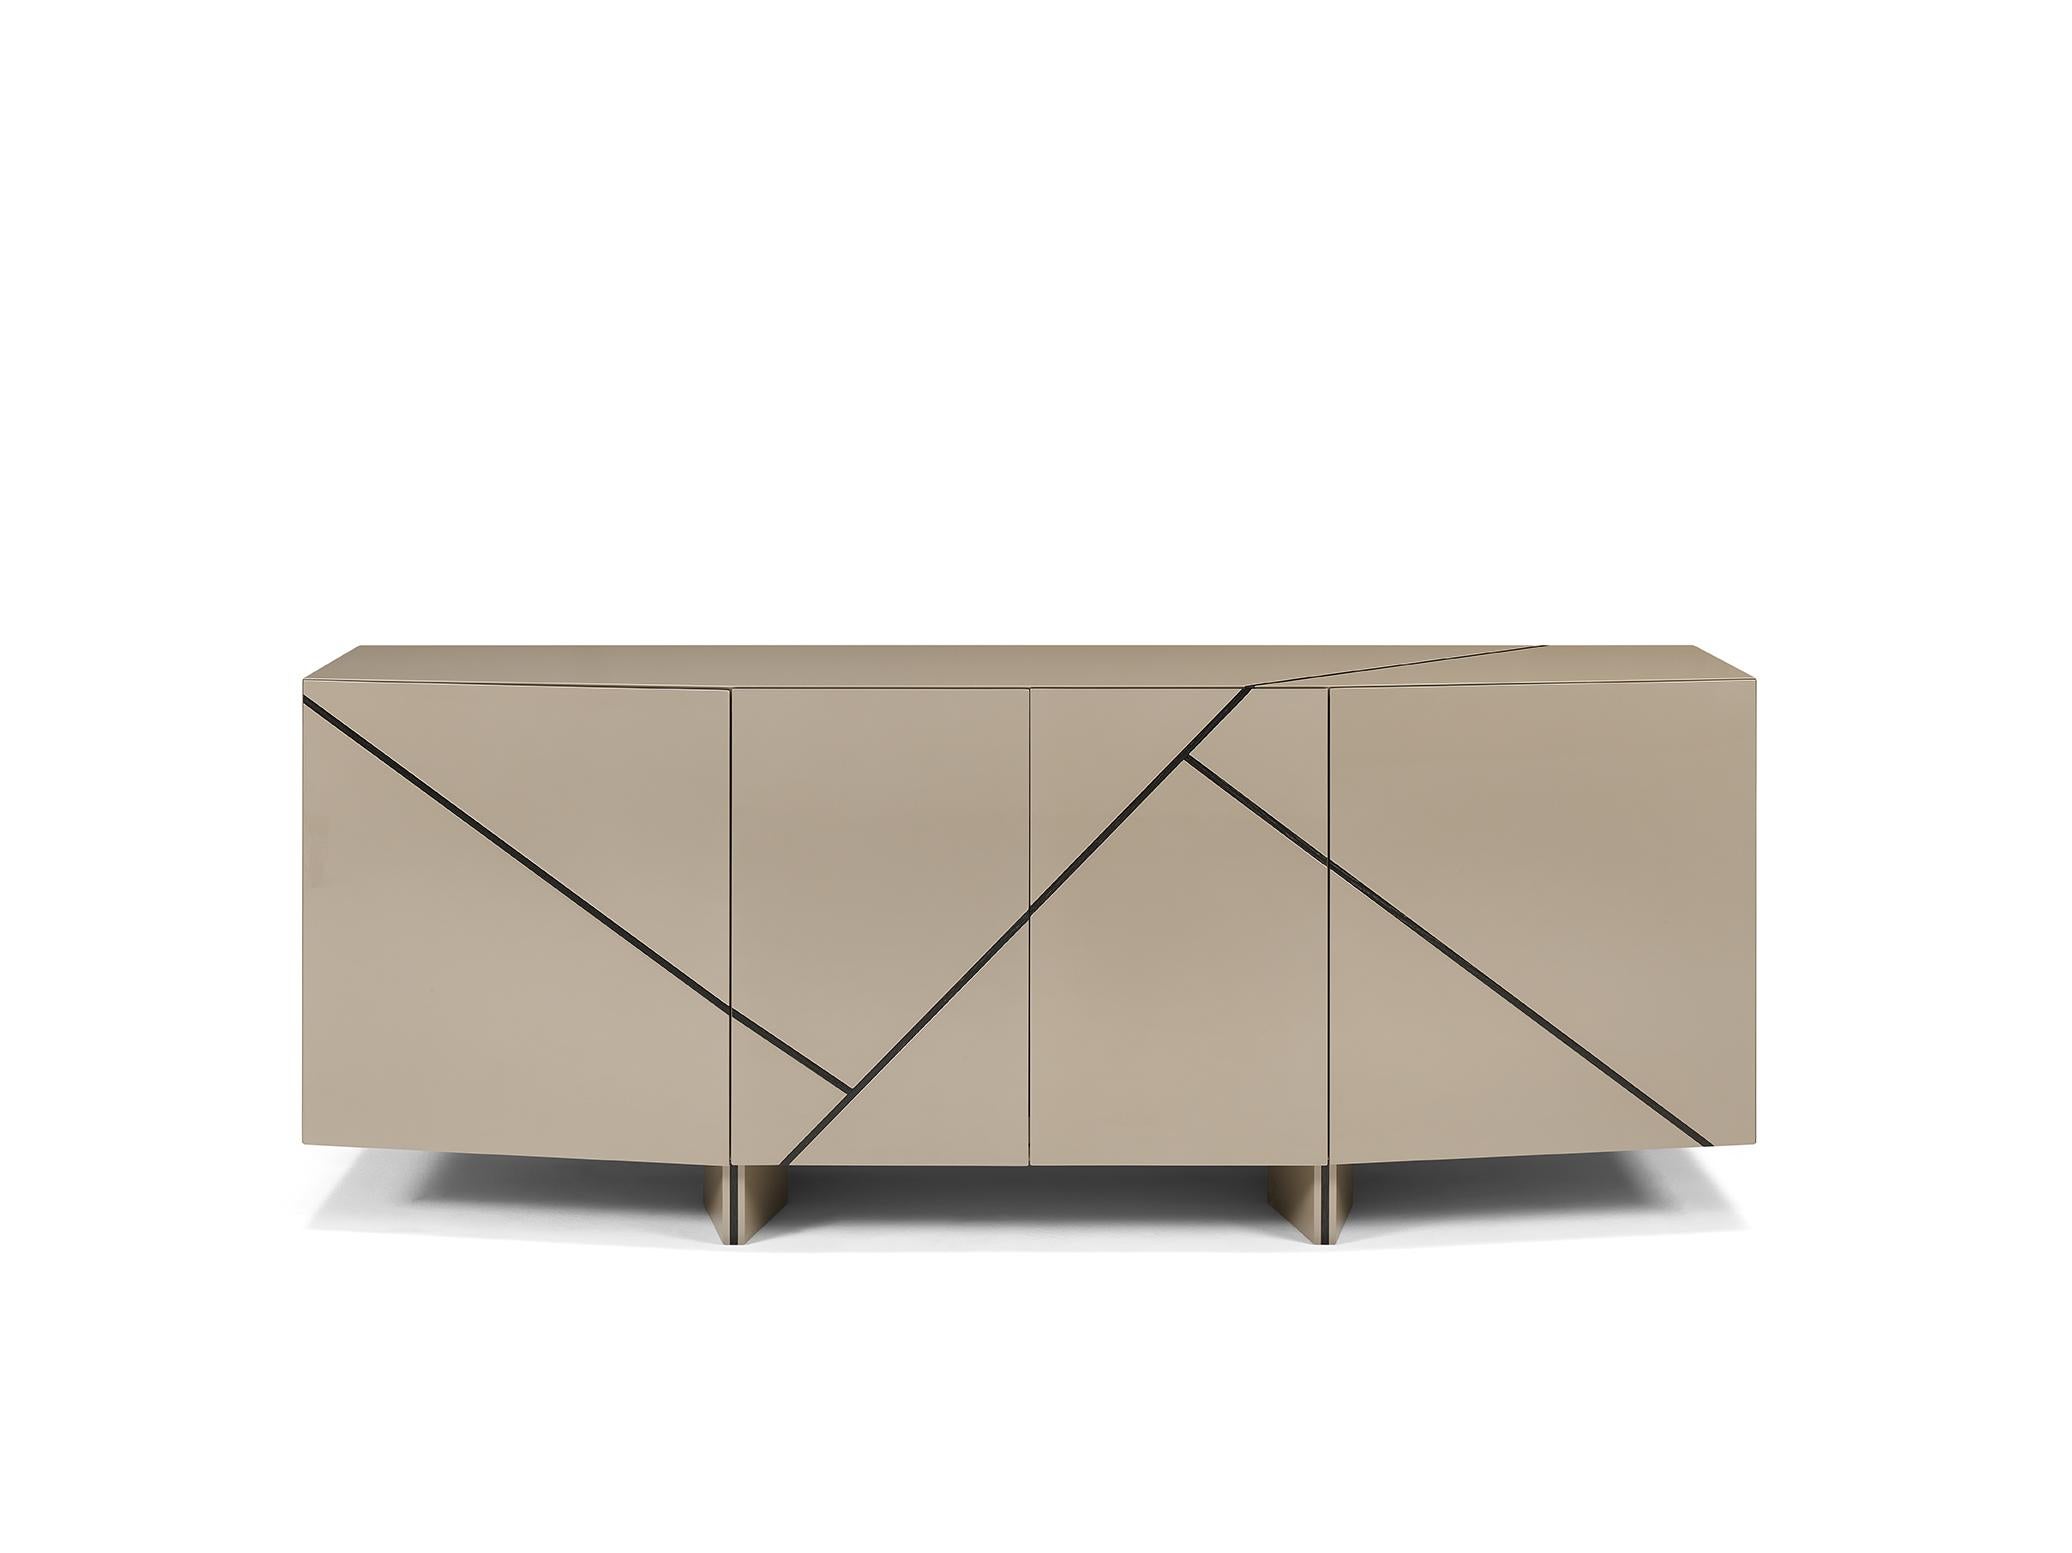 LORCA sideboard is a bold design piece that brings elegance and sobriety to any modern room project. Available in any lacquer or veneered wood on request. Inlaid details in antique brass color, stainless steel or in wood.

Shown in glossy lacquer in